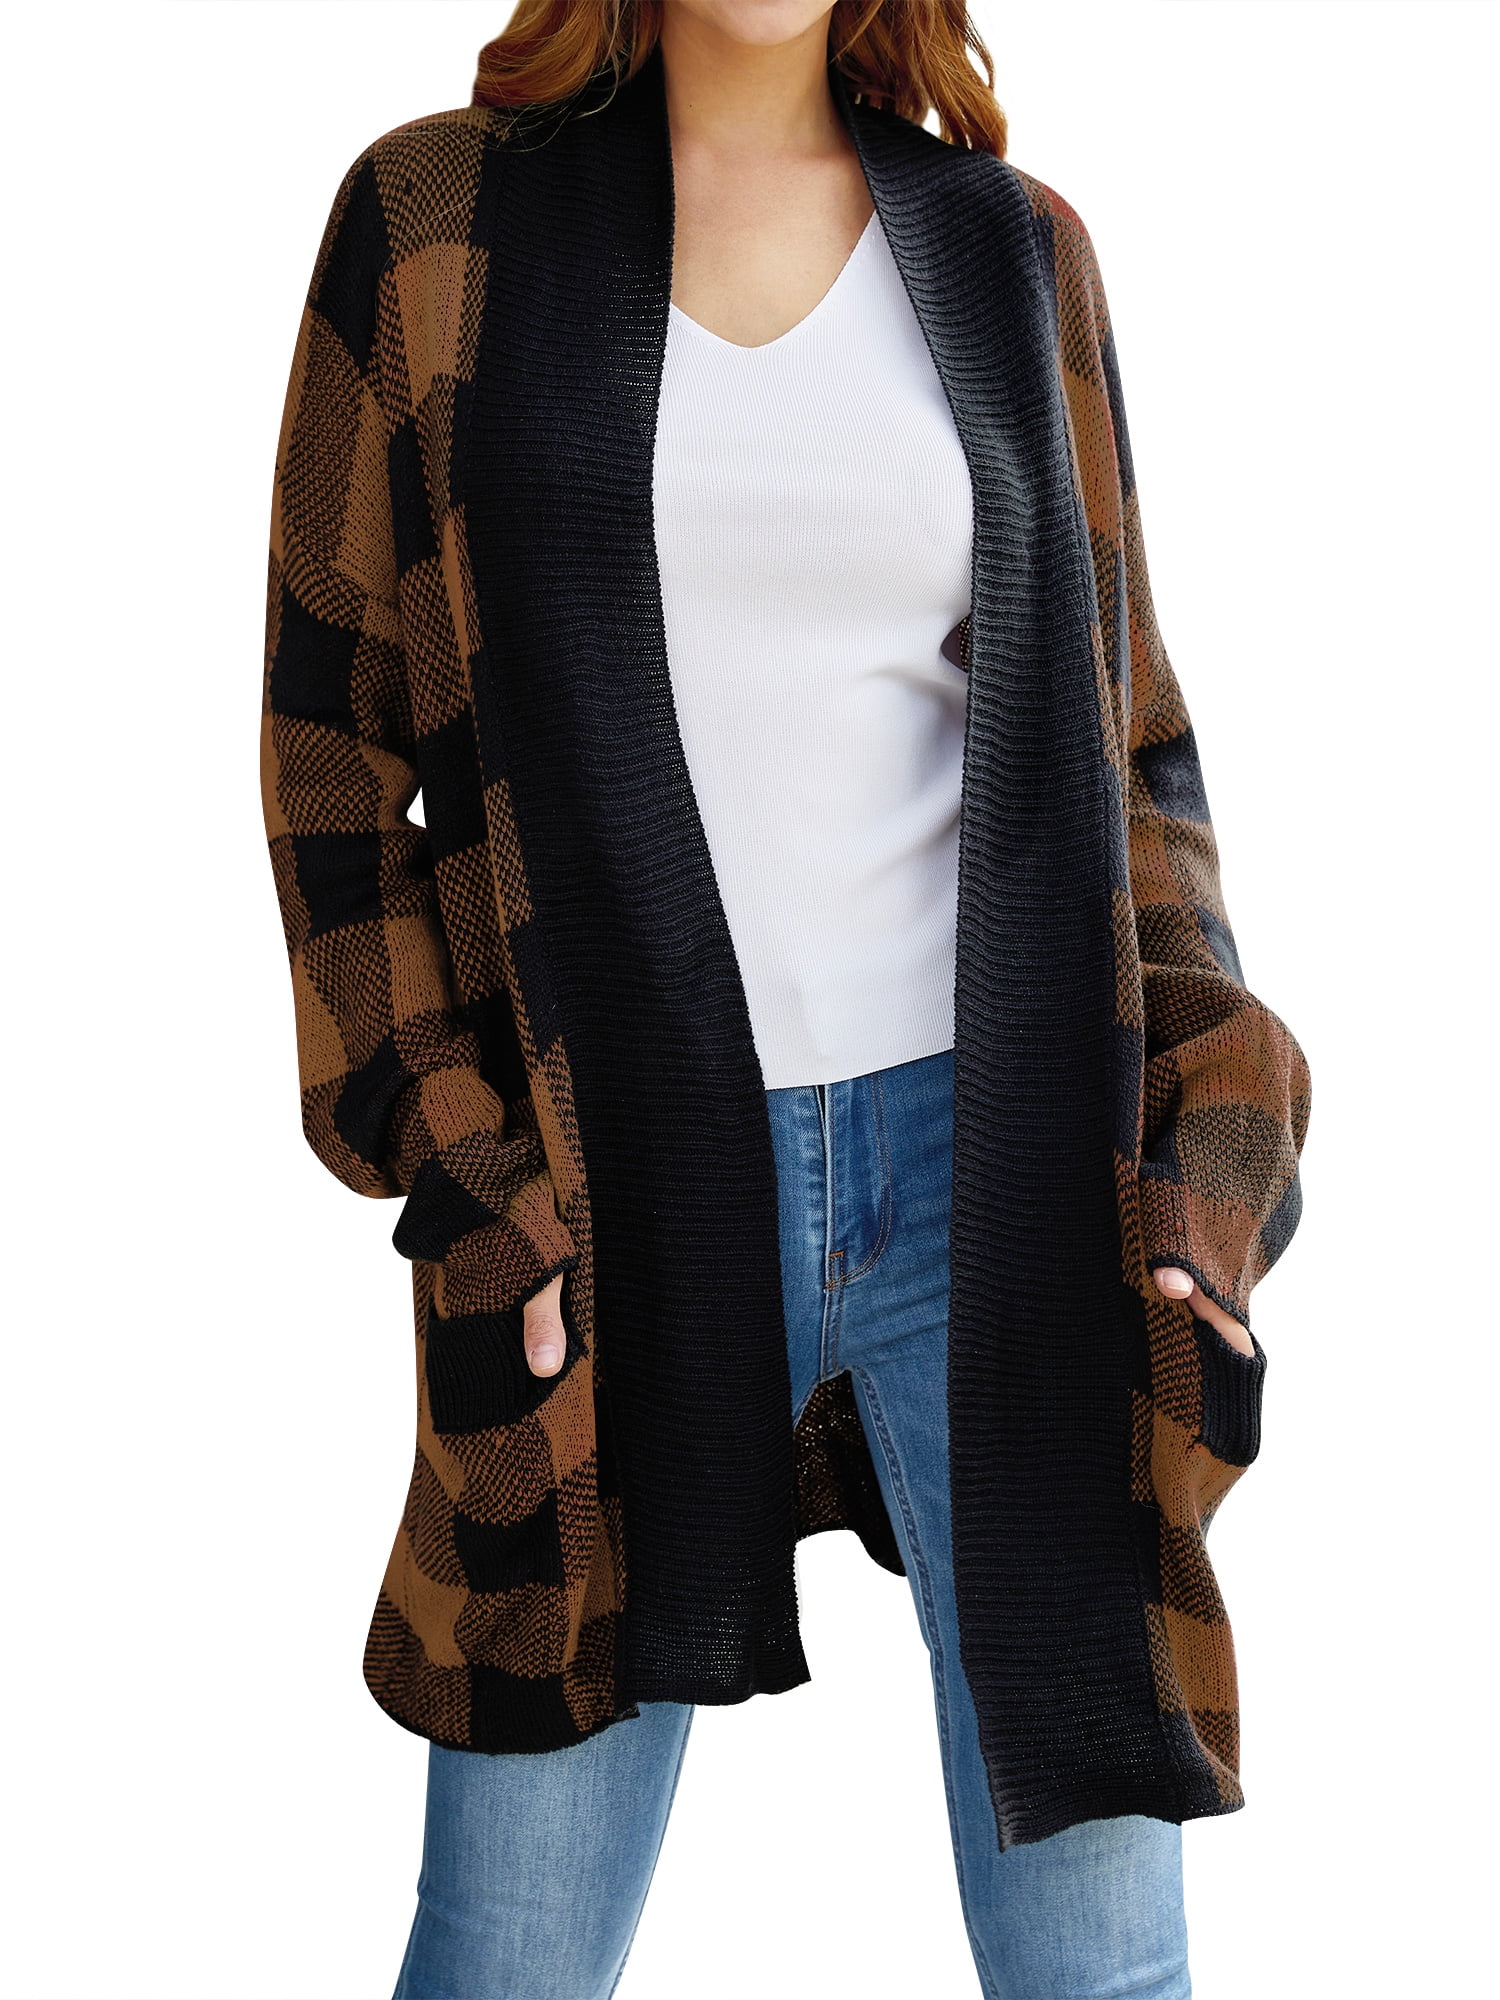 Women Plaid Printed Open Front Pockets Long Sleeve Winter Sweater ...